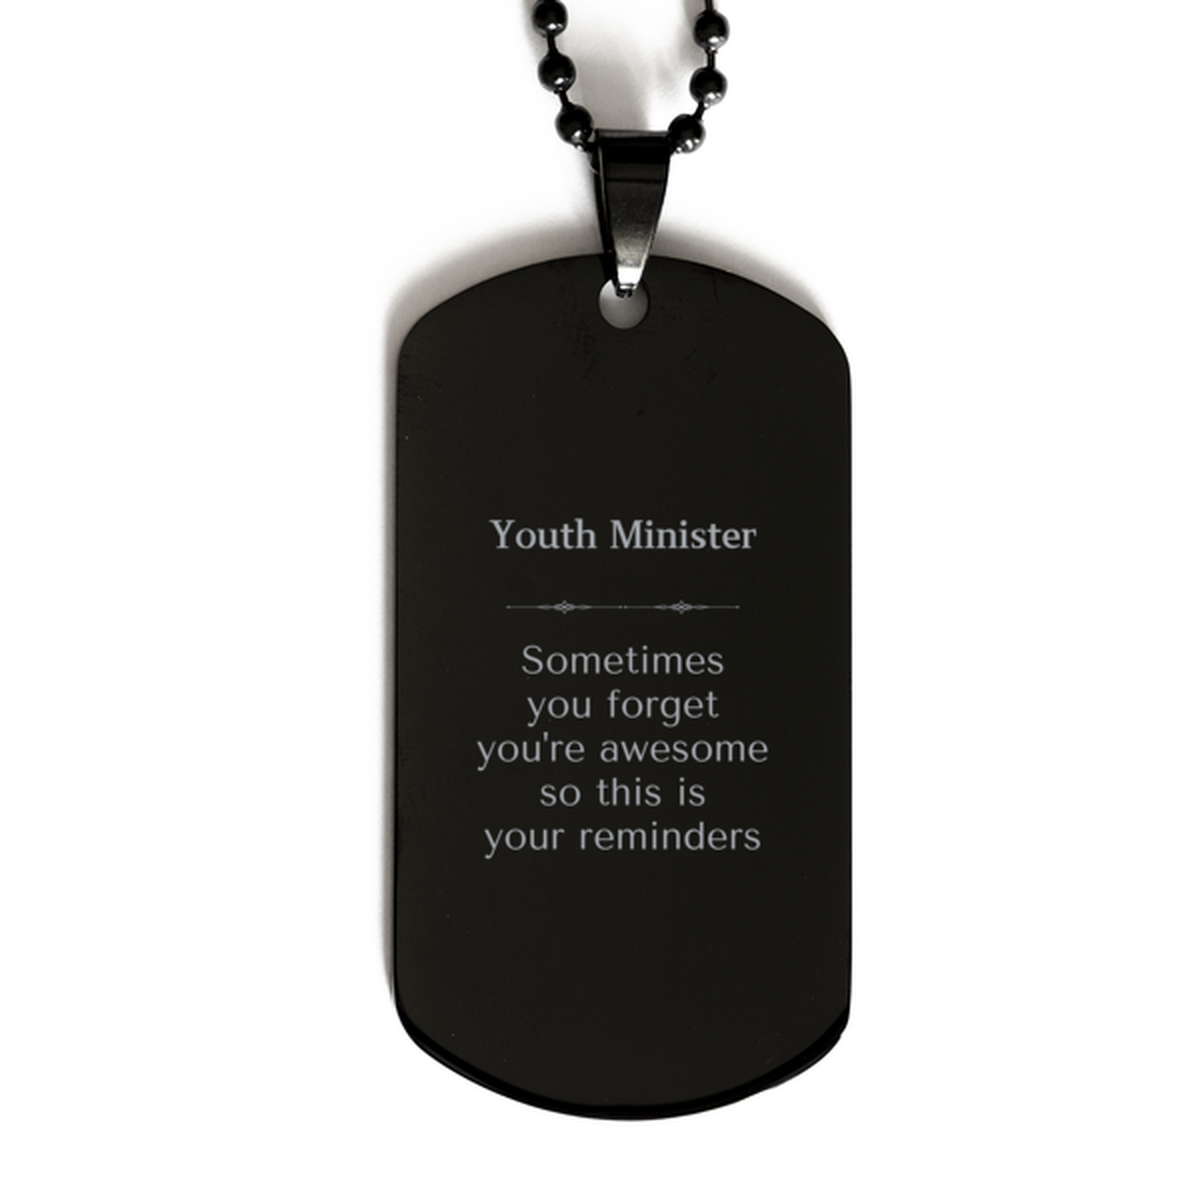 Sentimental Youth Minister Black Dog Tag, Youth Minister Sometimes you forget you're awesome so this is your reminders, Graduation Christmas Birthday Gifts for Youth Minister, Men, Women, Coworkers